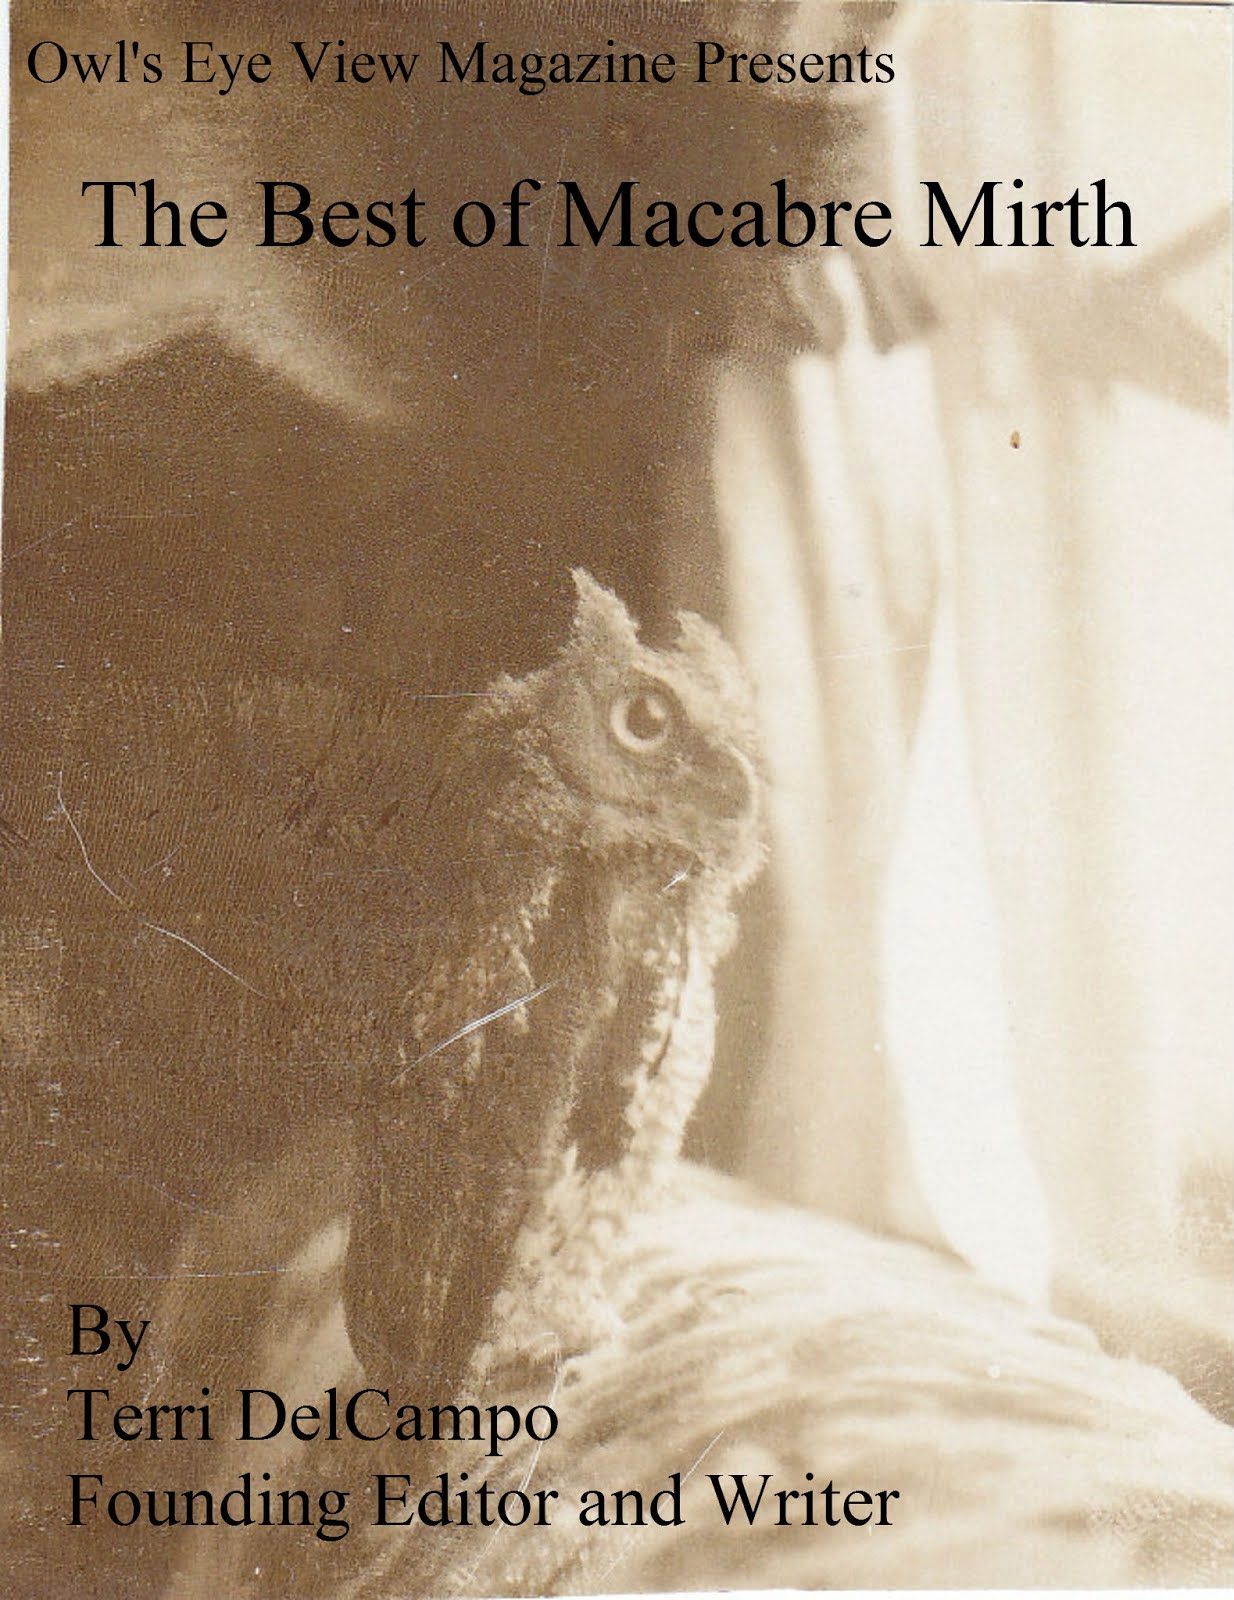 OEV MAGAZINE PRESENTS THE BEST OF MACABRE MIRTH